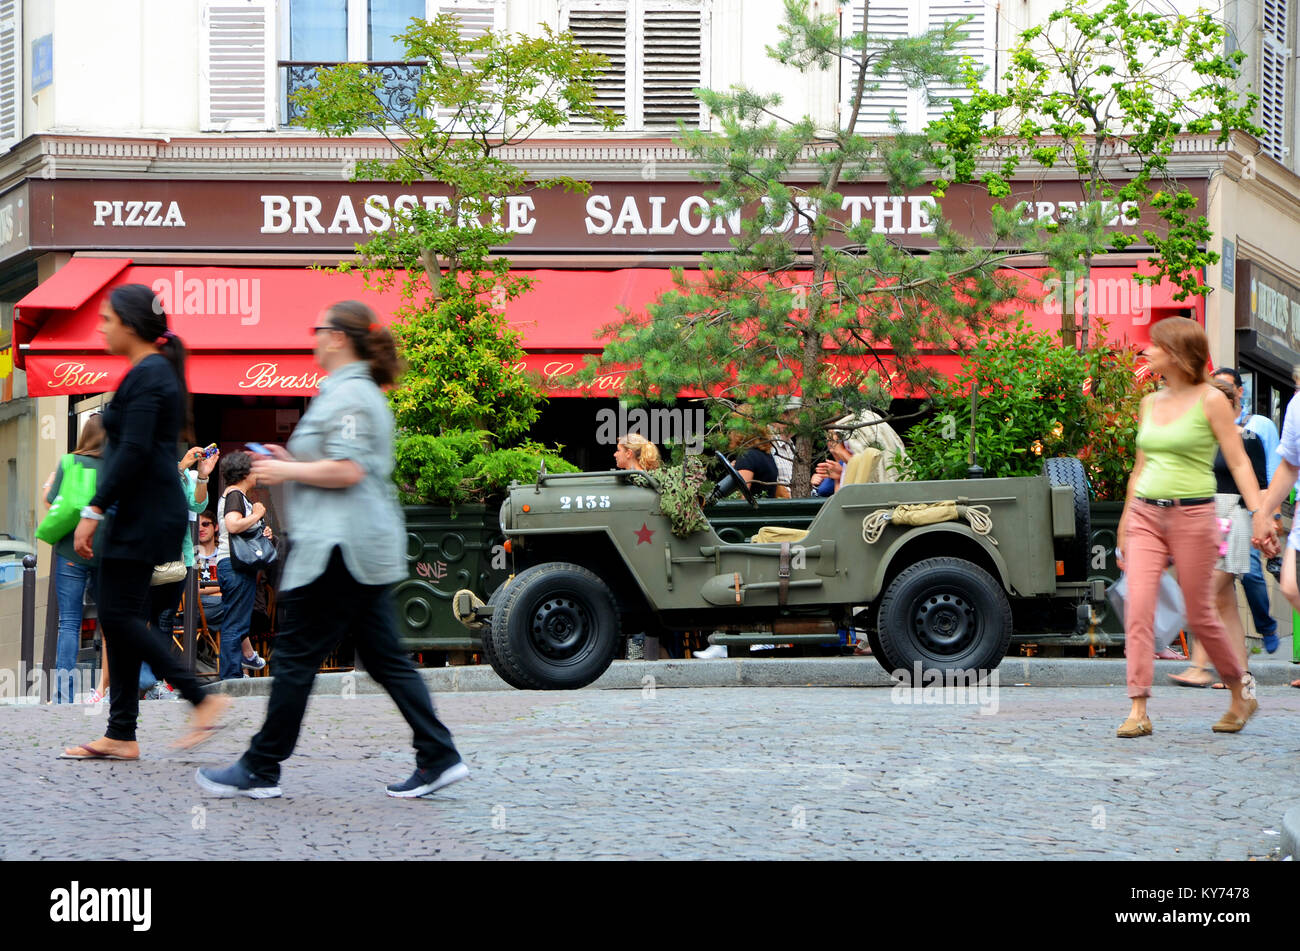 The Salons de thé brasserie in the Montmartre district of Paris, France with wartime American US Jeep outside. People walking by Stock Photo